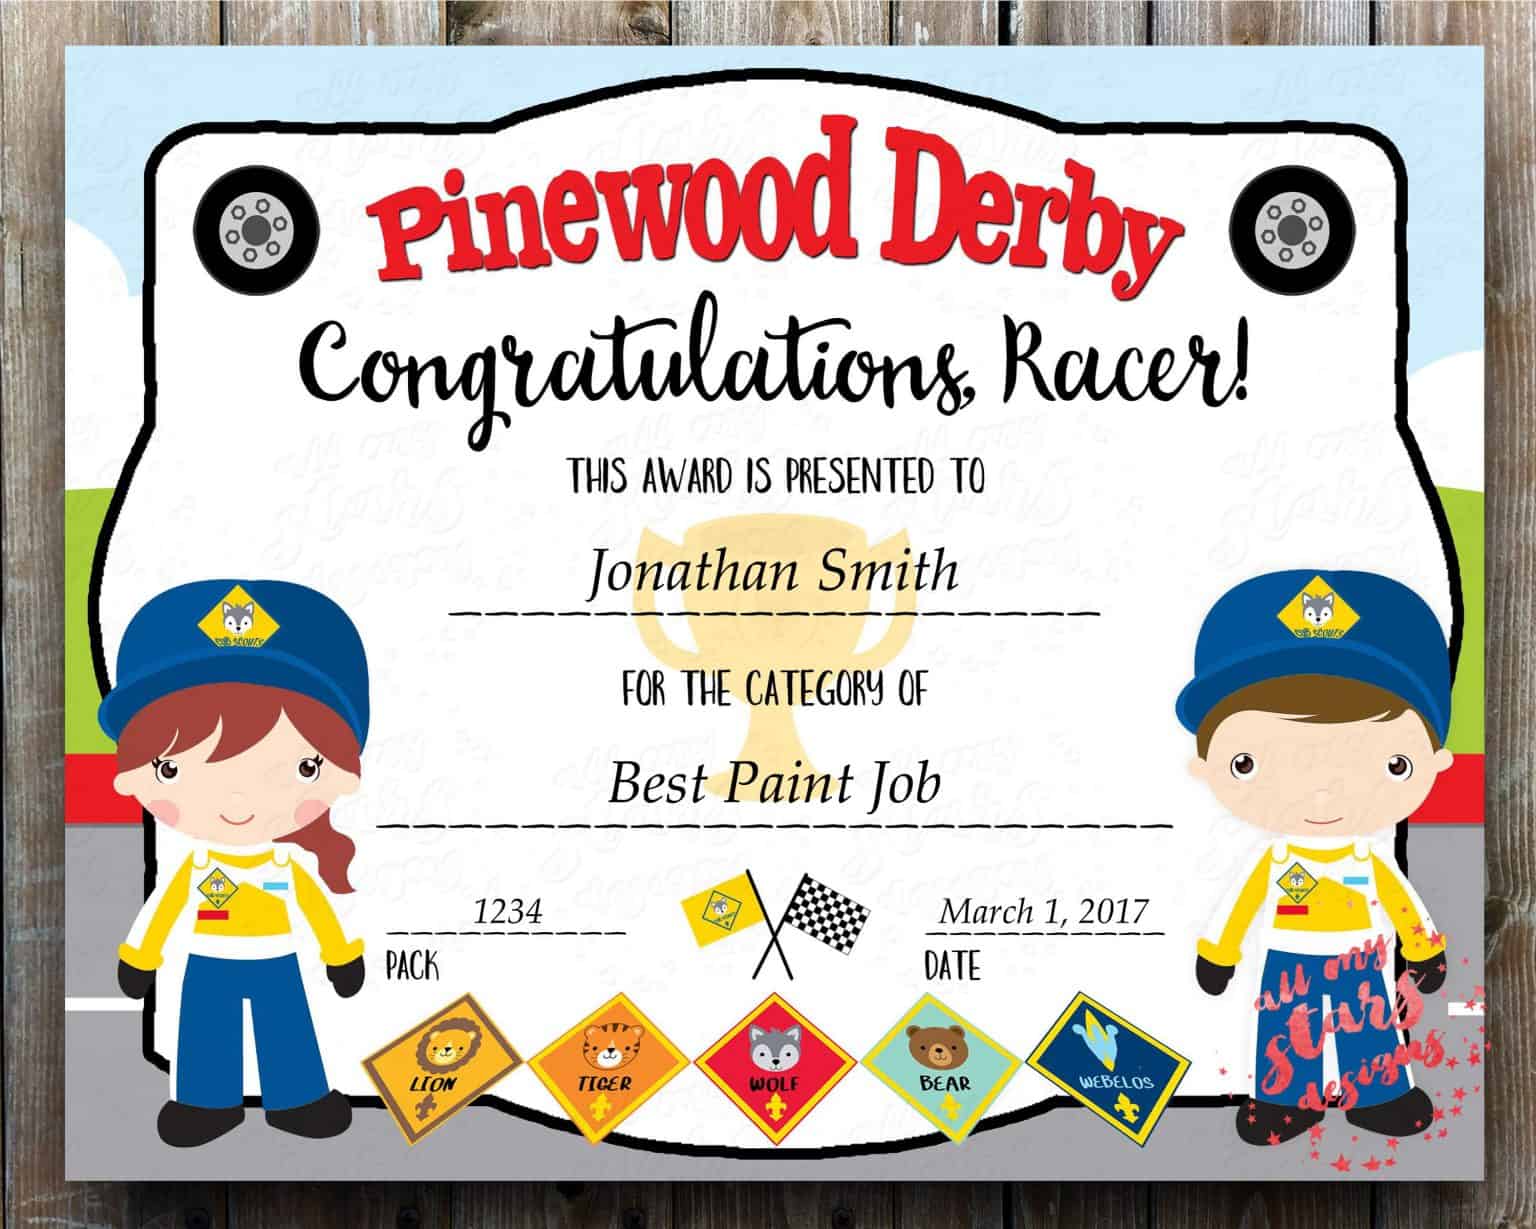 98 of the Most Awesome Pinewood Derby Award Ideas ~ Cub Scout Ideas